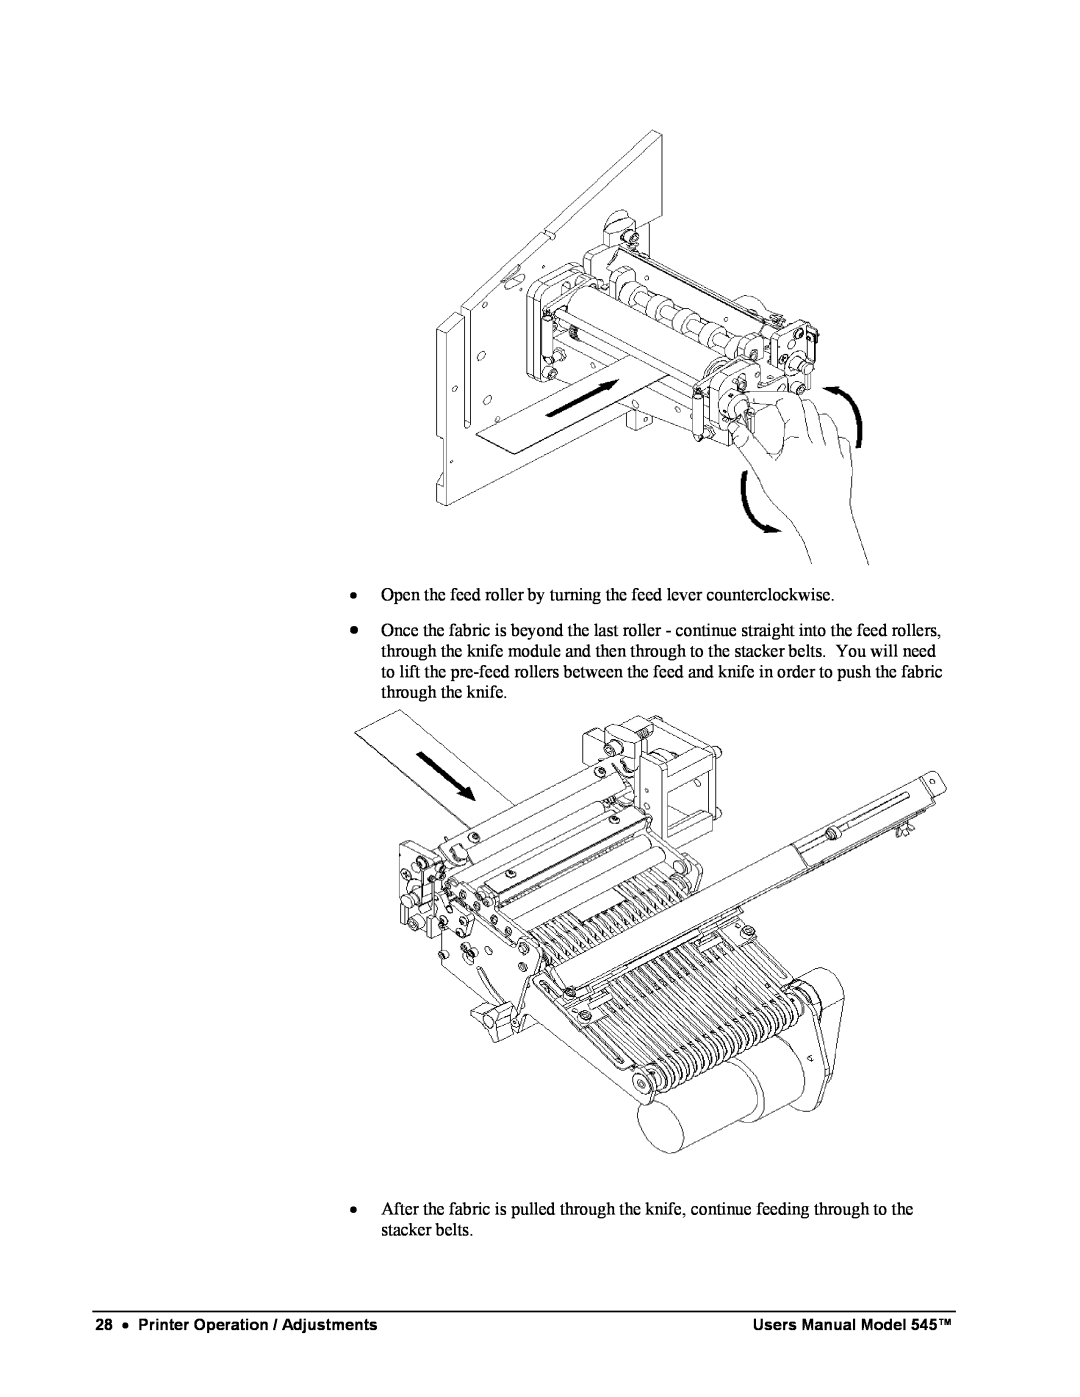 Paxar 545 user manual Open the feed roller by turning the feed lever counterclockwise 